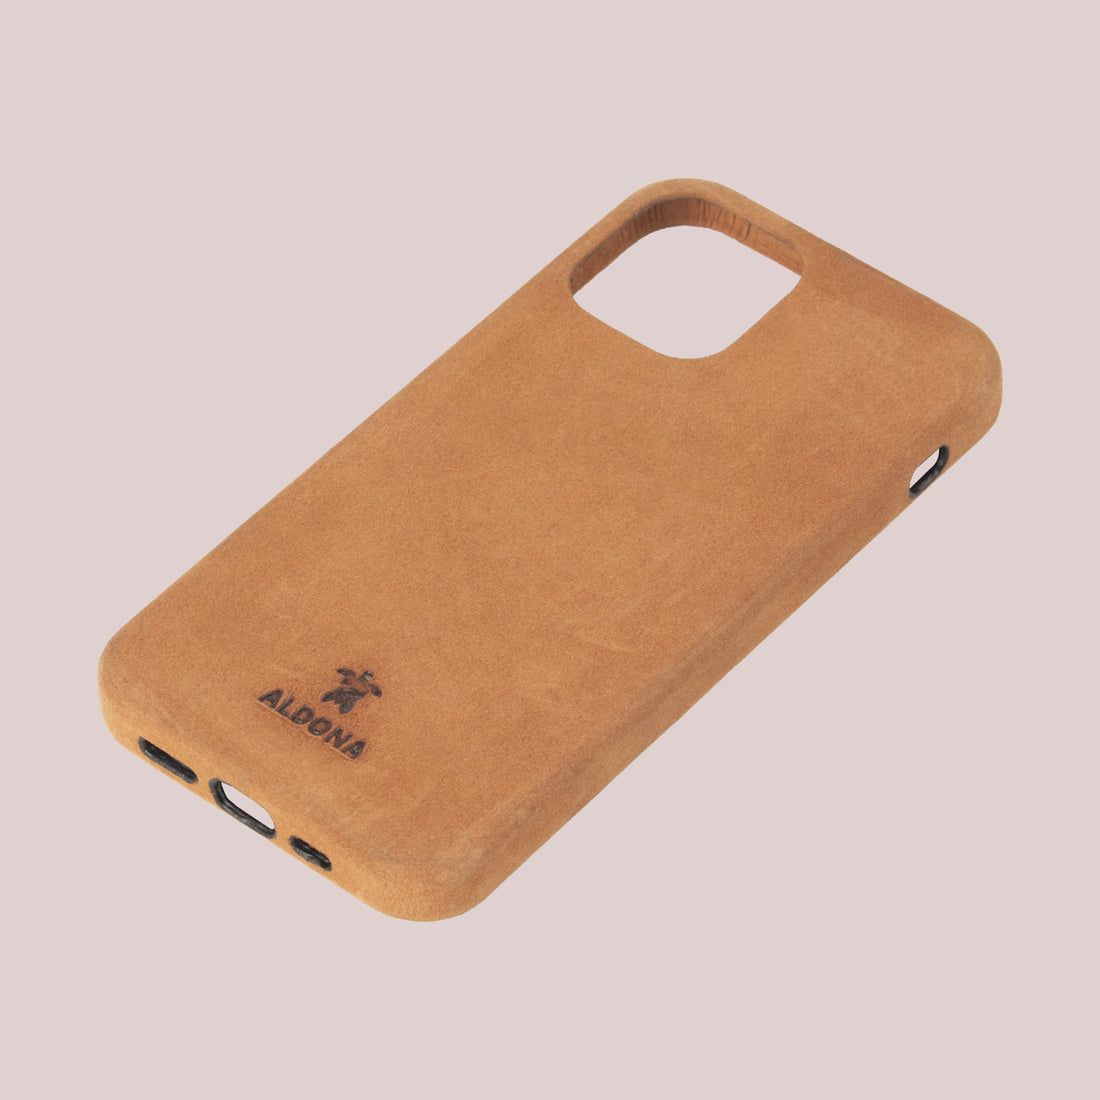 Kalon Case for iPhone 14 with MagSafe Compatibility - Vintage Tan